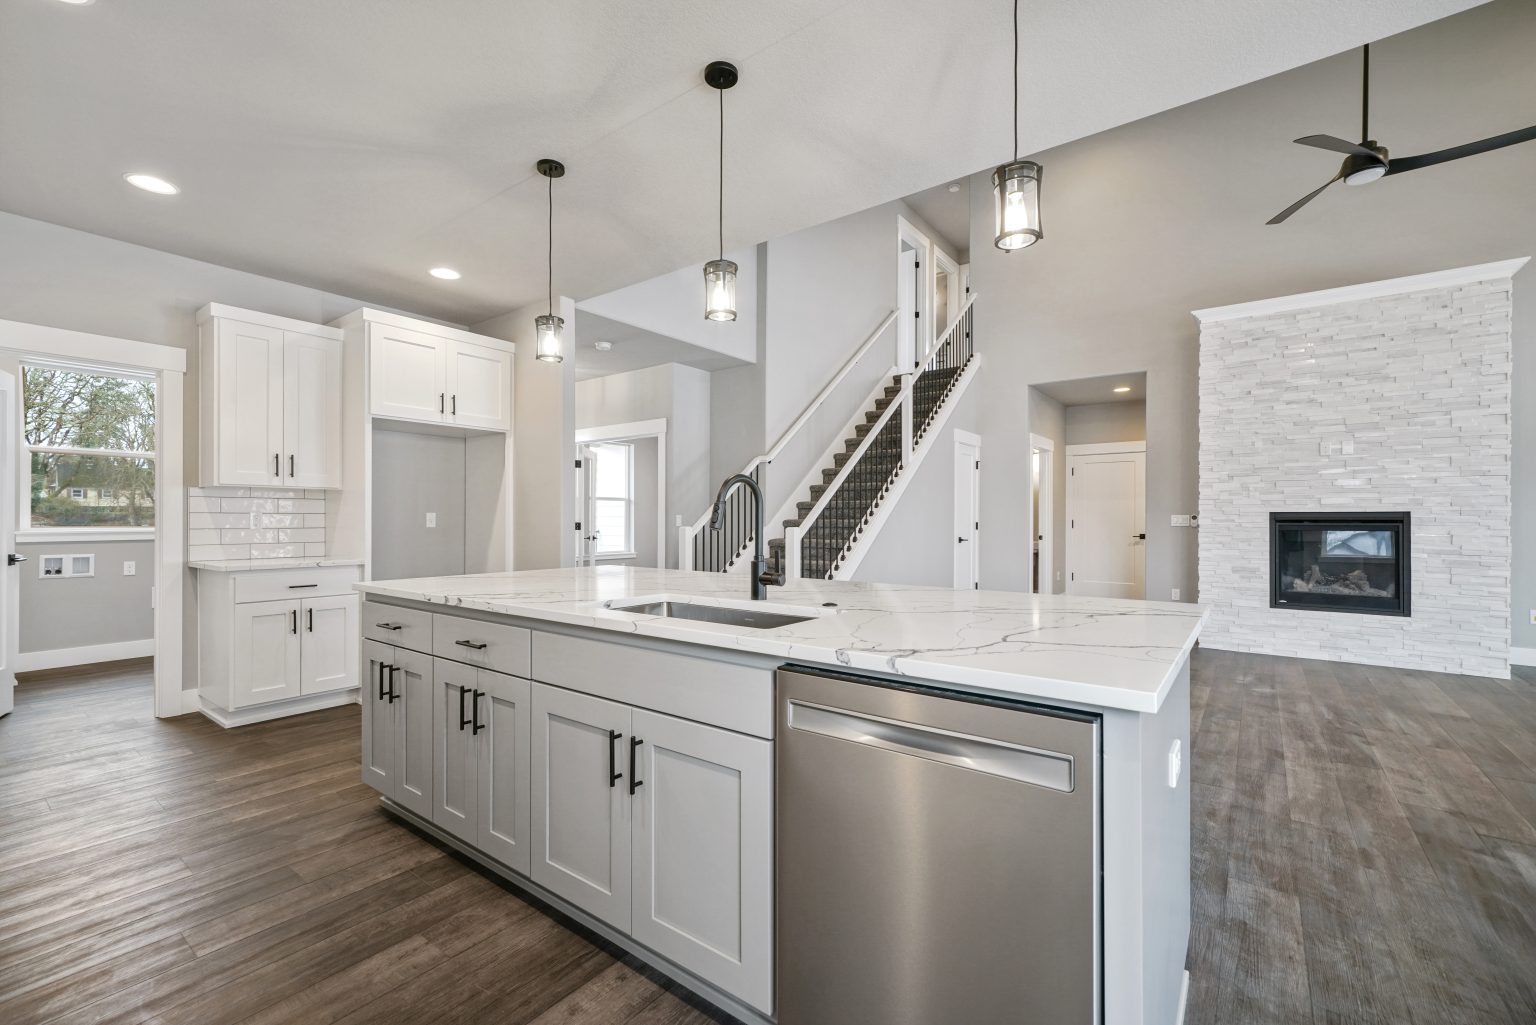 Beautiful, spacious open floor plan in the kitchen and living spaces, kitchen island, white cupboards stairs leading to top floor, and white exposed stone wall with built-in gas fireplace